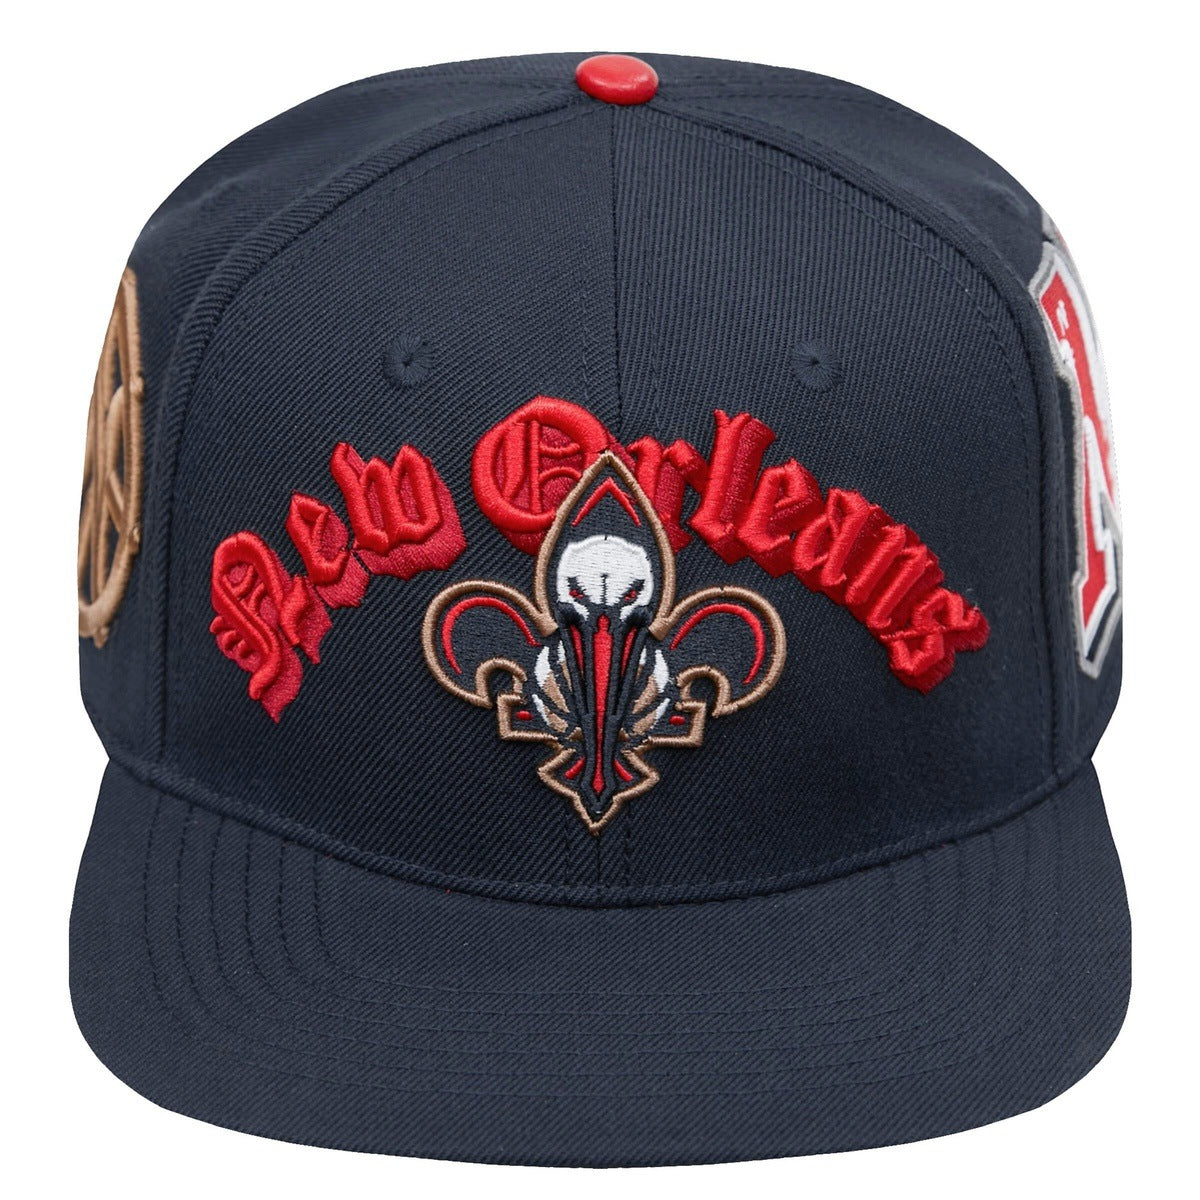 NBA NEW ORLEANS PELICANS OLD ENGLISH WOOL UNISEX SNAPBACK HAT (MIDNIGHT NAVY)